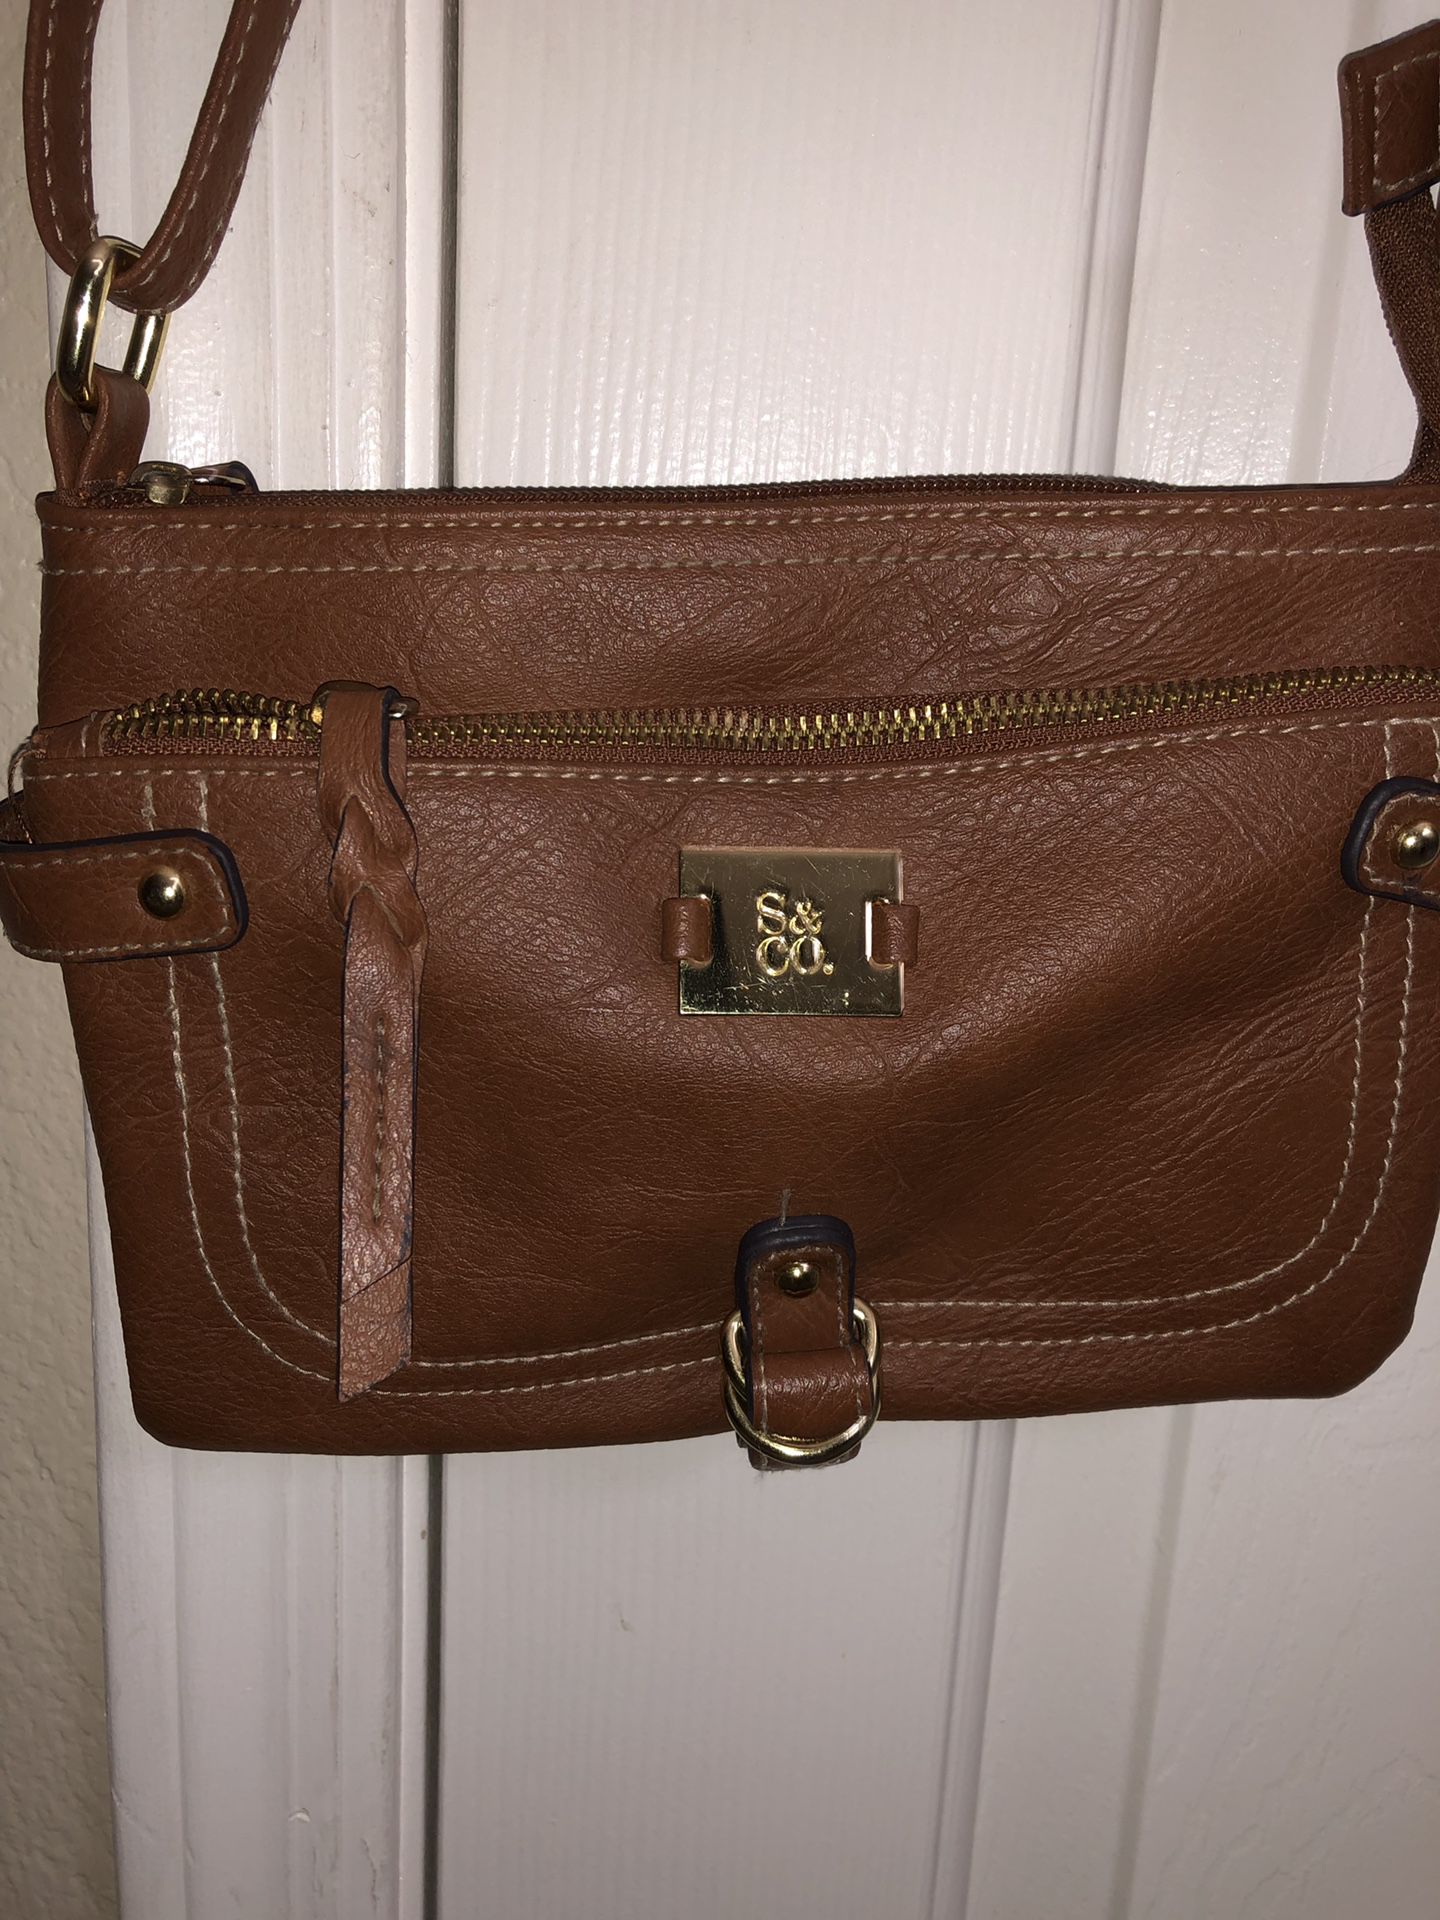 Leather Crossbody Purse - Grey/White Checkered / Gold Chain for Sale in  Phoenix, AZ - OfferUp